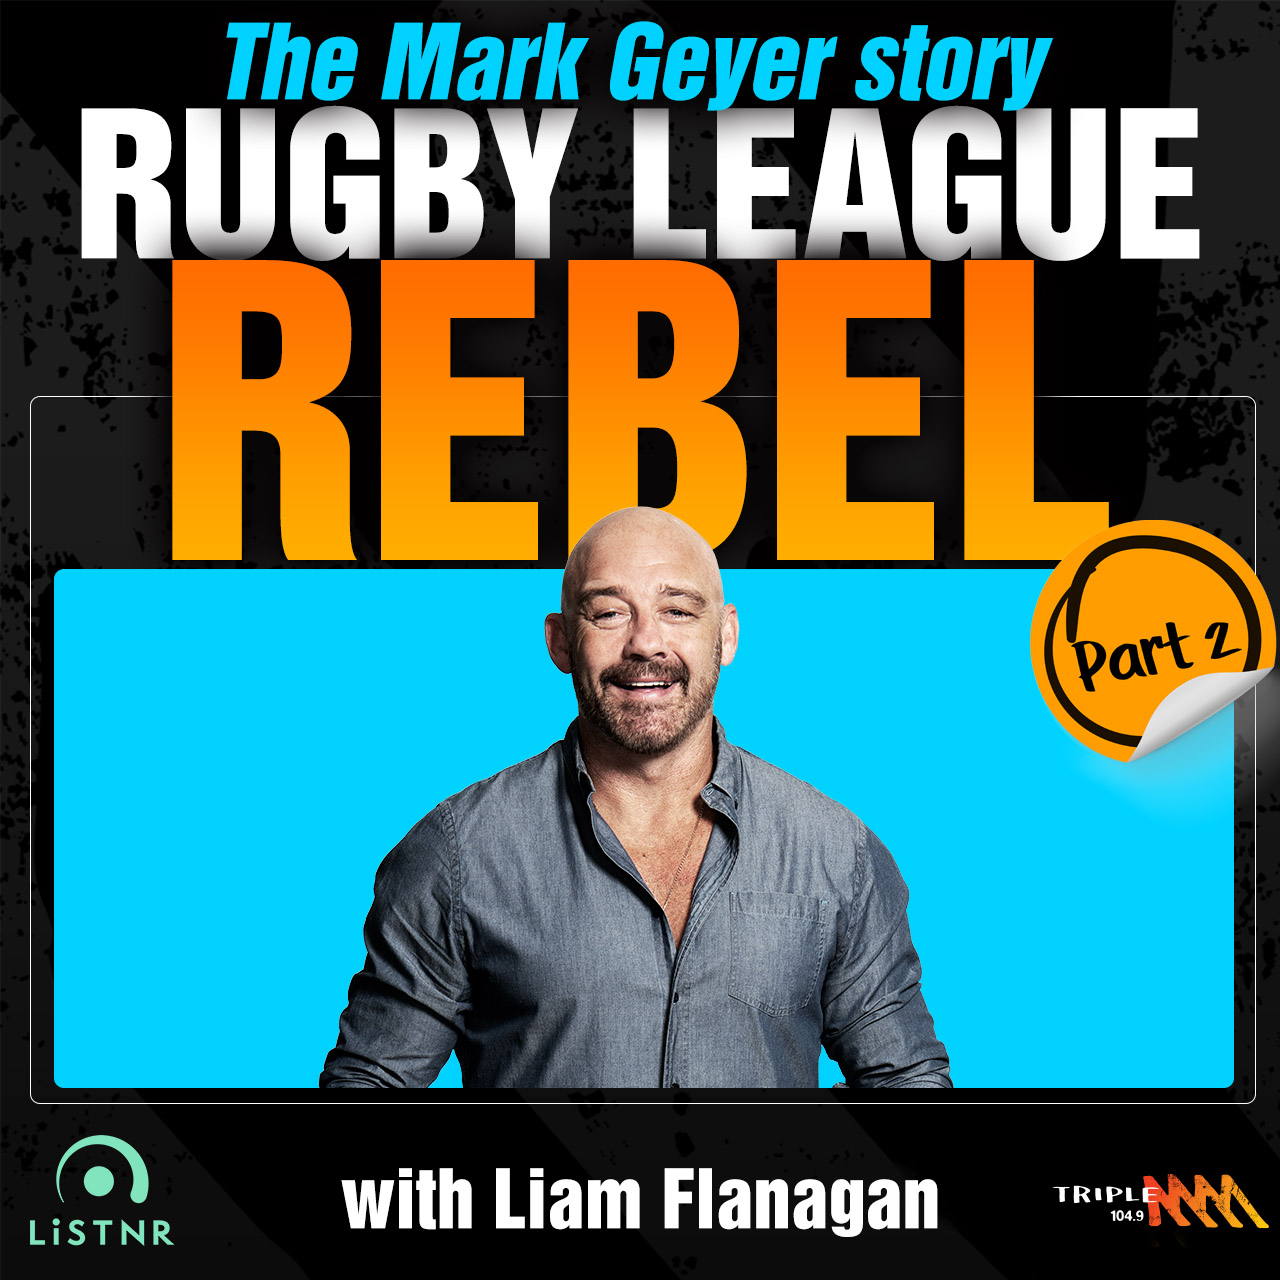 The Man On Your Radio | Rugby League Rebel Part 2: The Mark Geyer Story - Episode 4